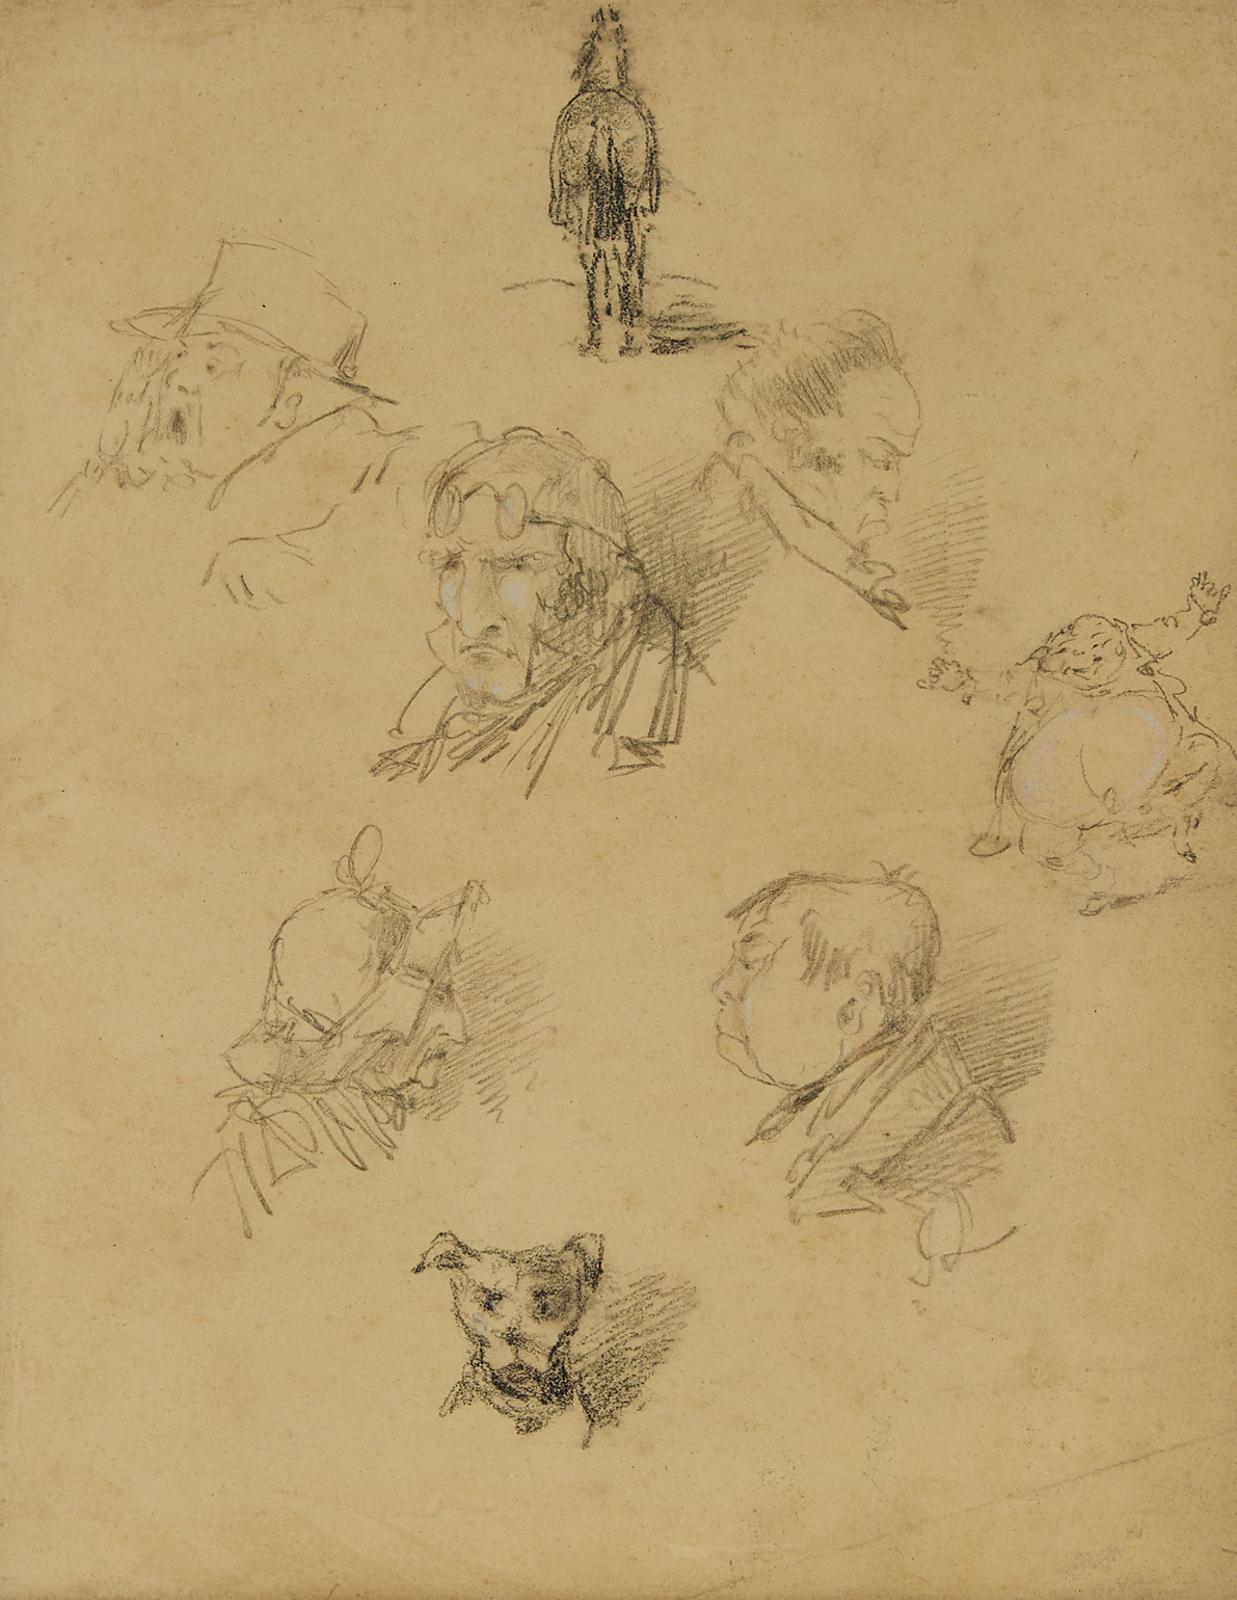 John Leech (1817-1864) - Aviator; Fat Man; Dog's Head; Horse And Rider, Man In Hat And Others)